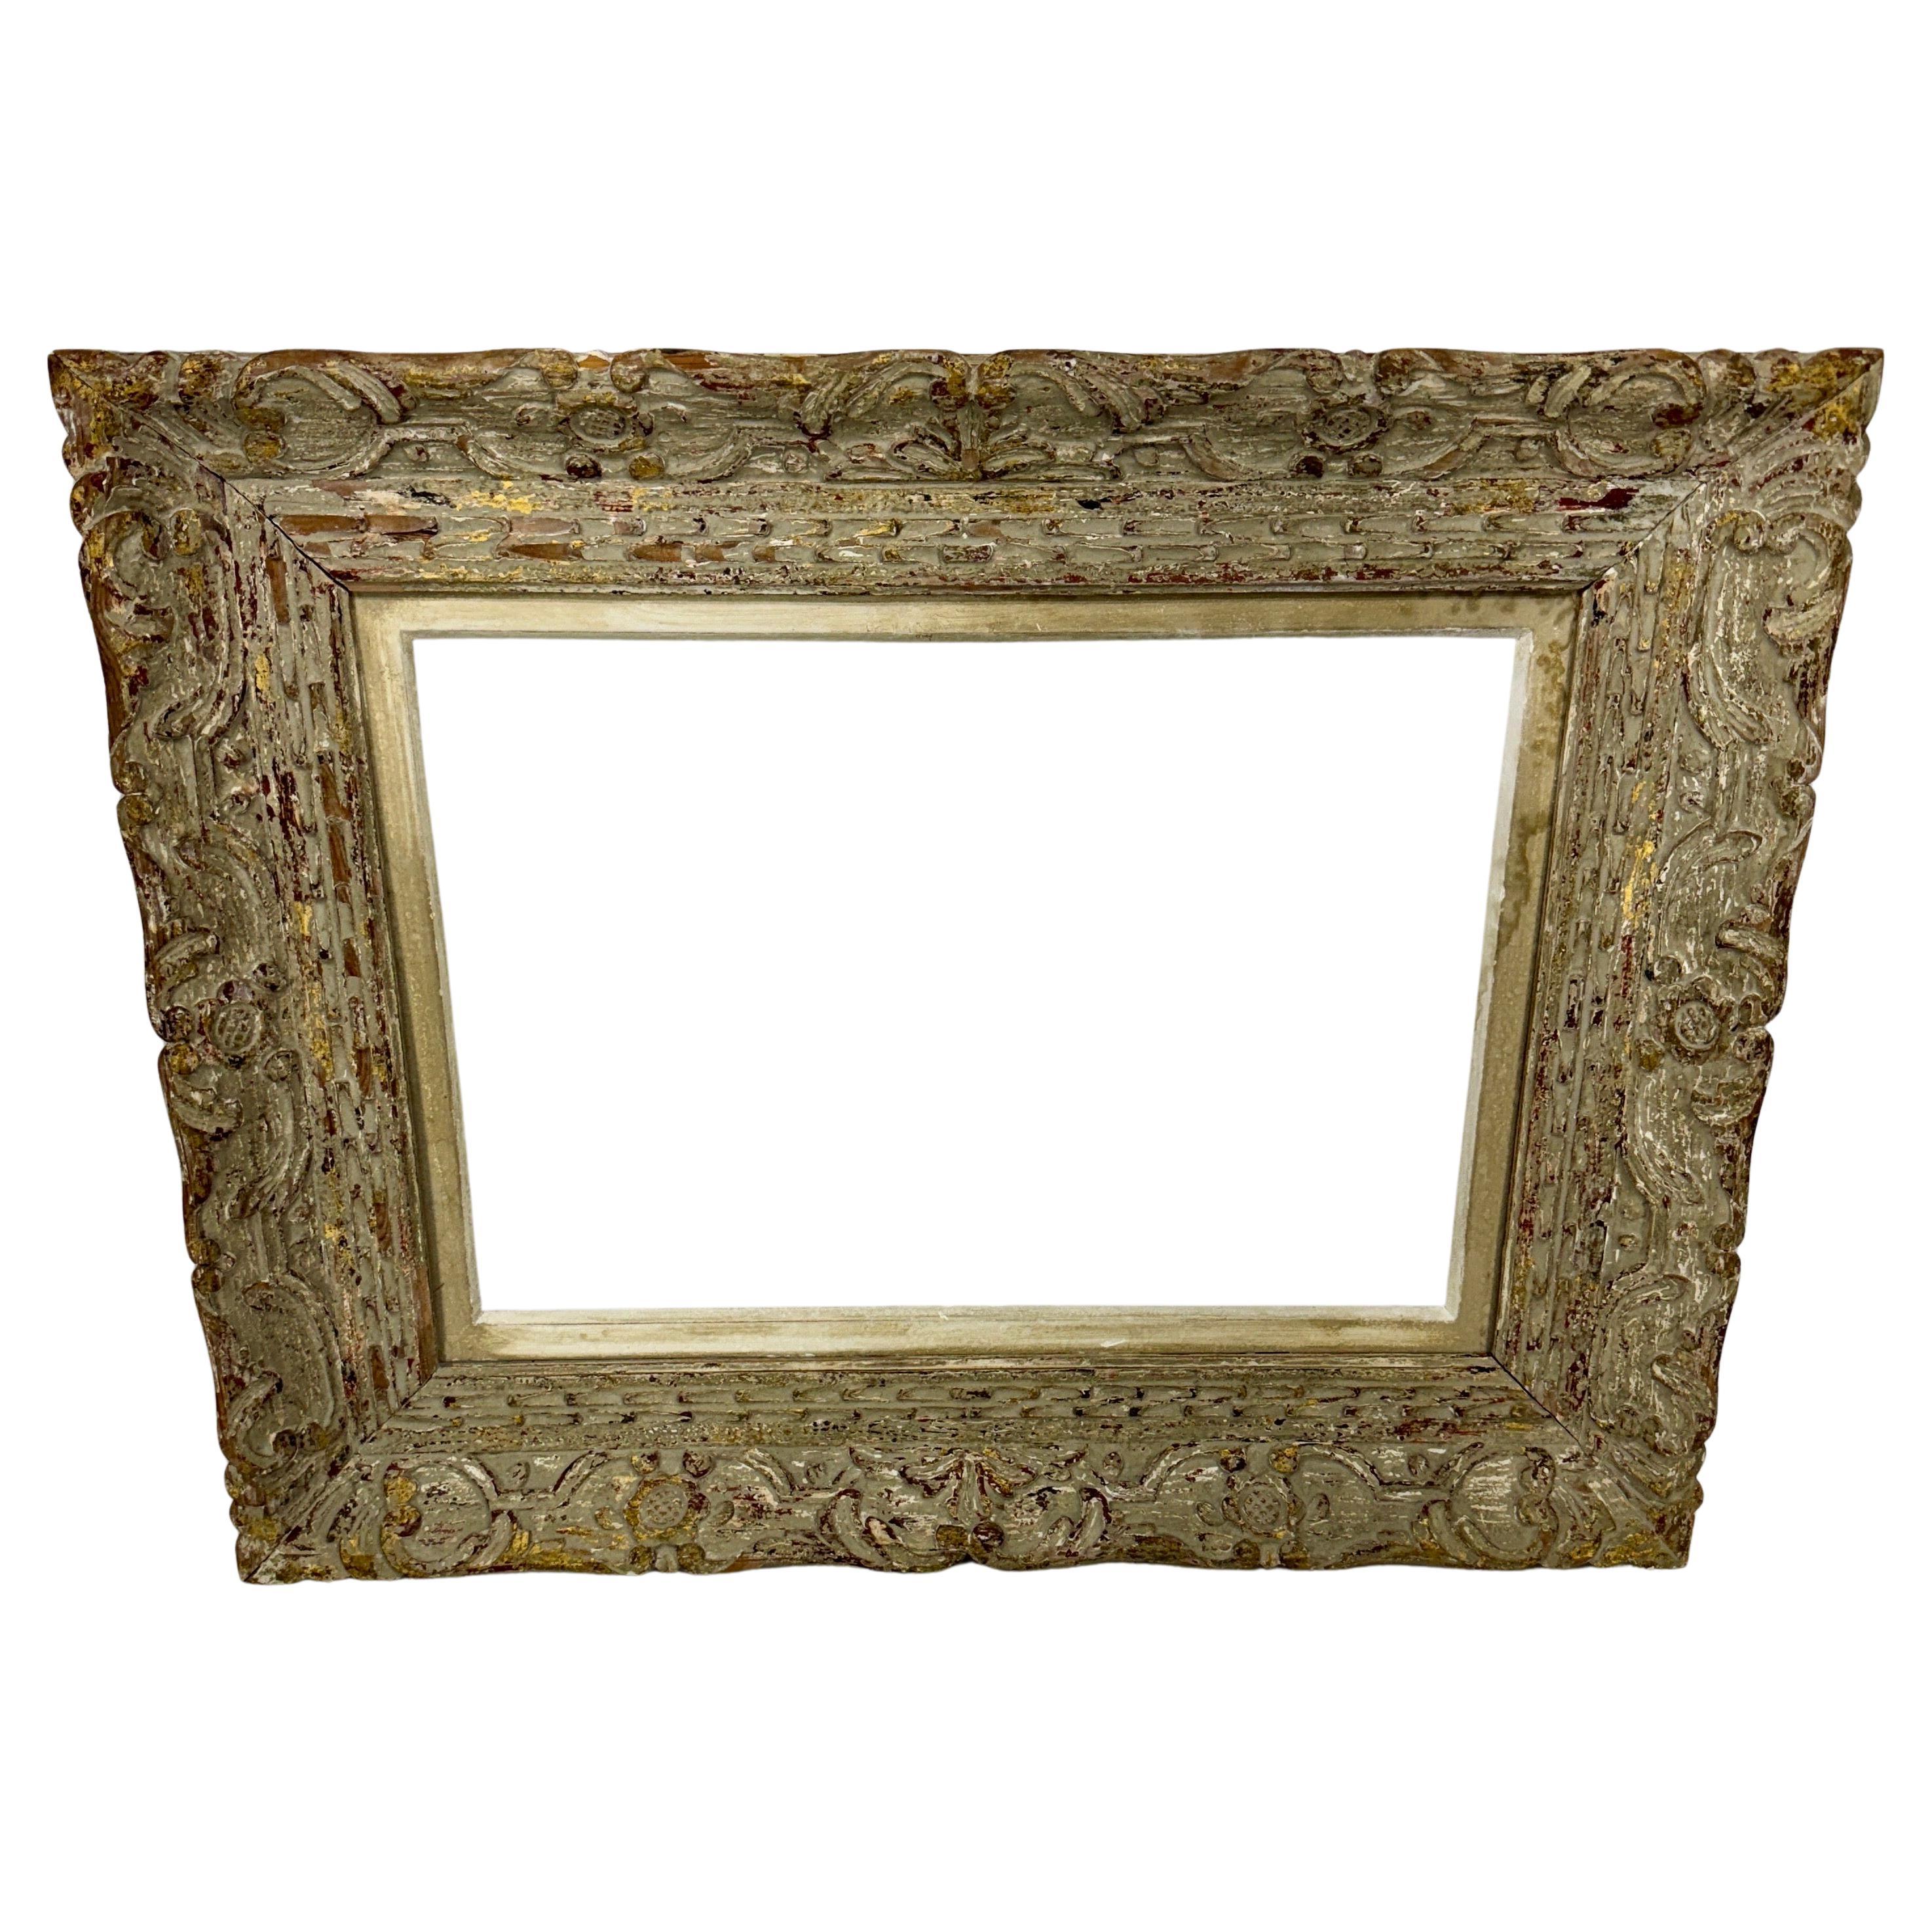 Carved Painted Wood Frame, 1950's

Fantastic carved wood frame with liner, in a distressed finish and incredible patina. Great piece for your favorite oil painting as well as could accommodate glass for a mirror. Certainly has the European/French